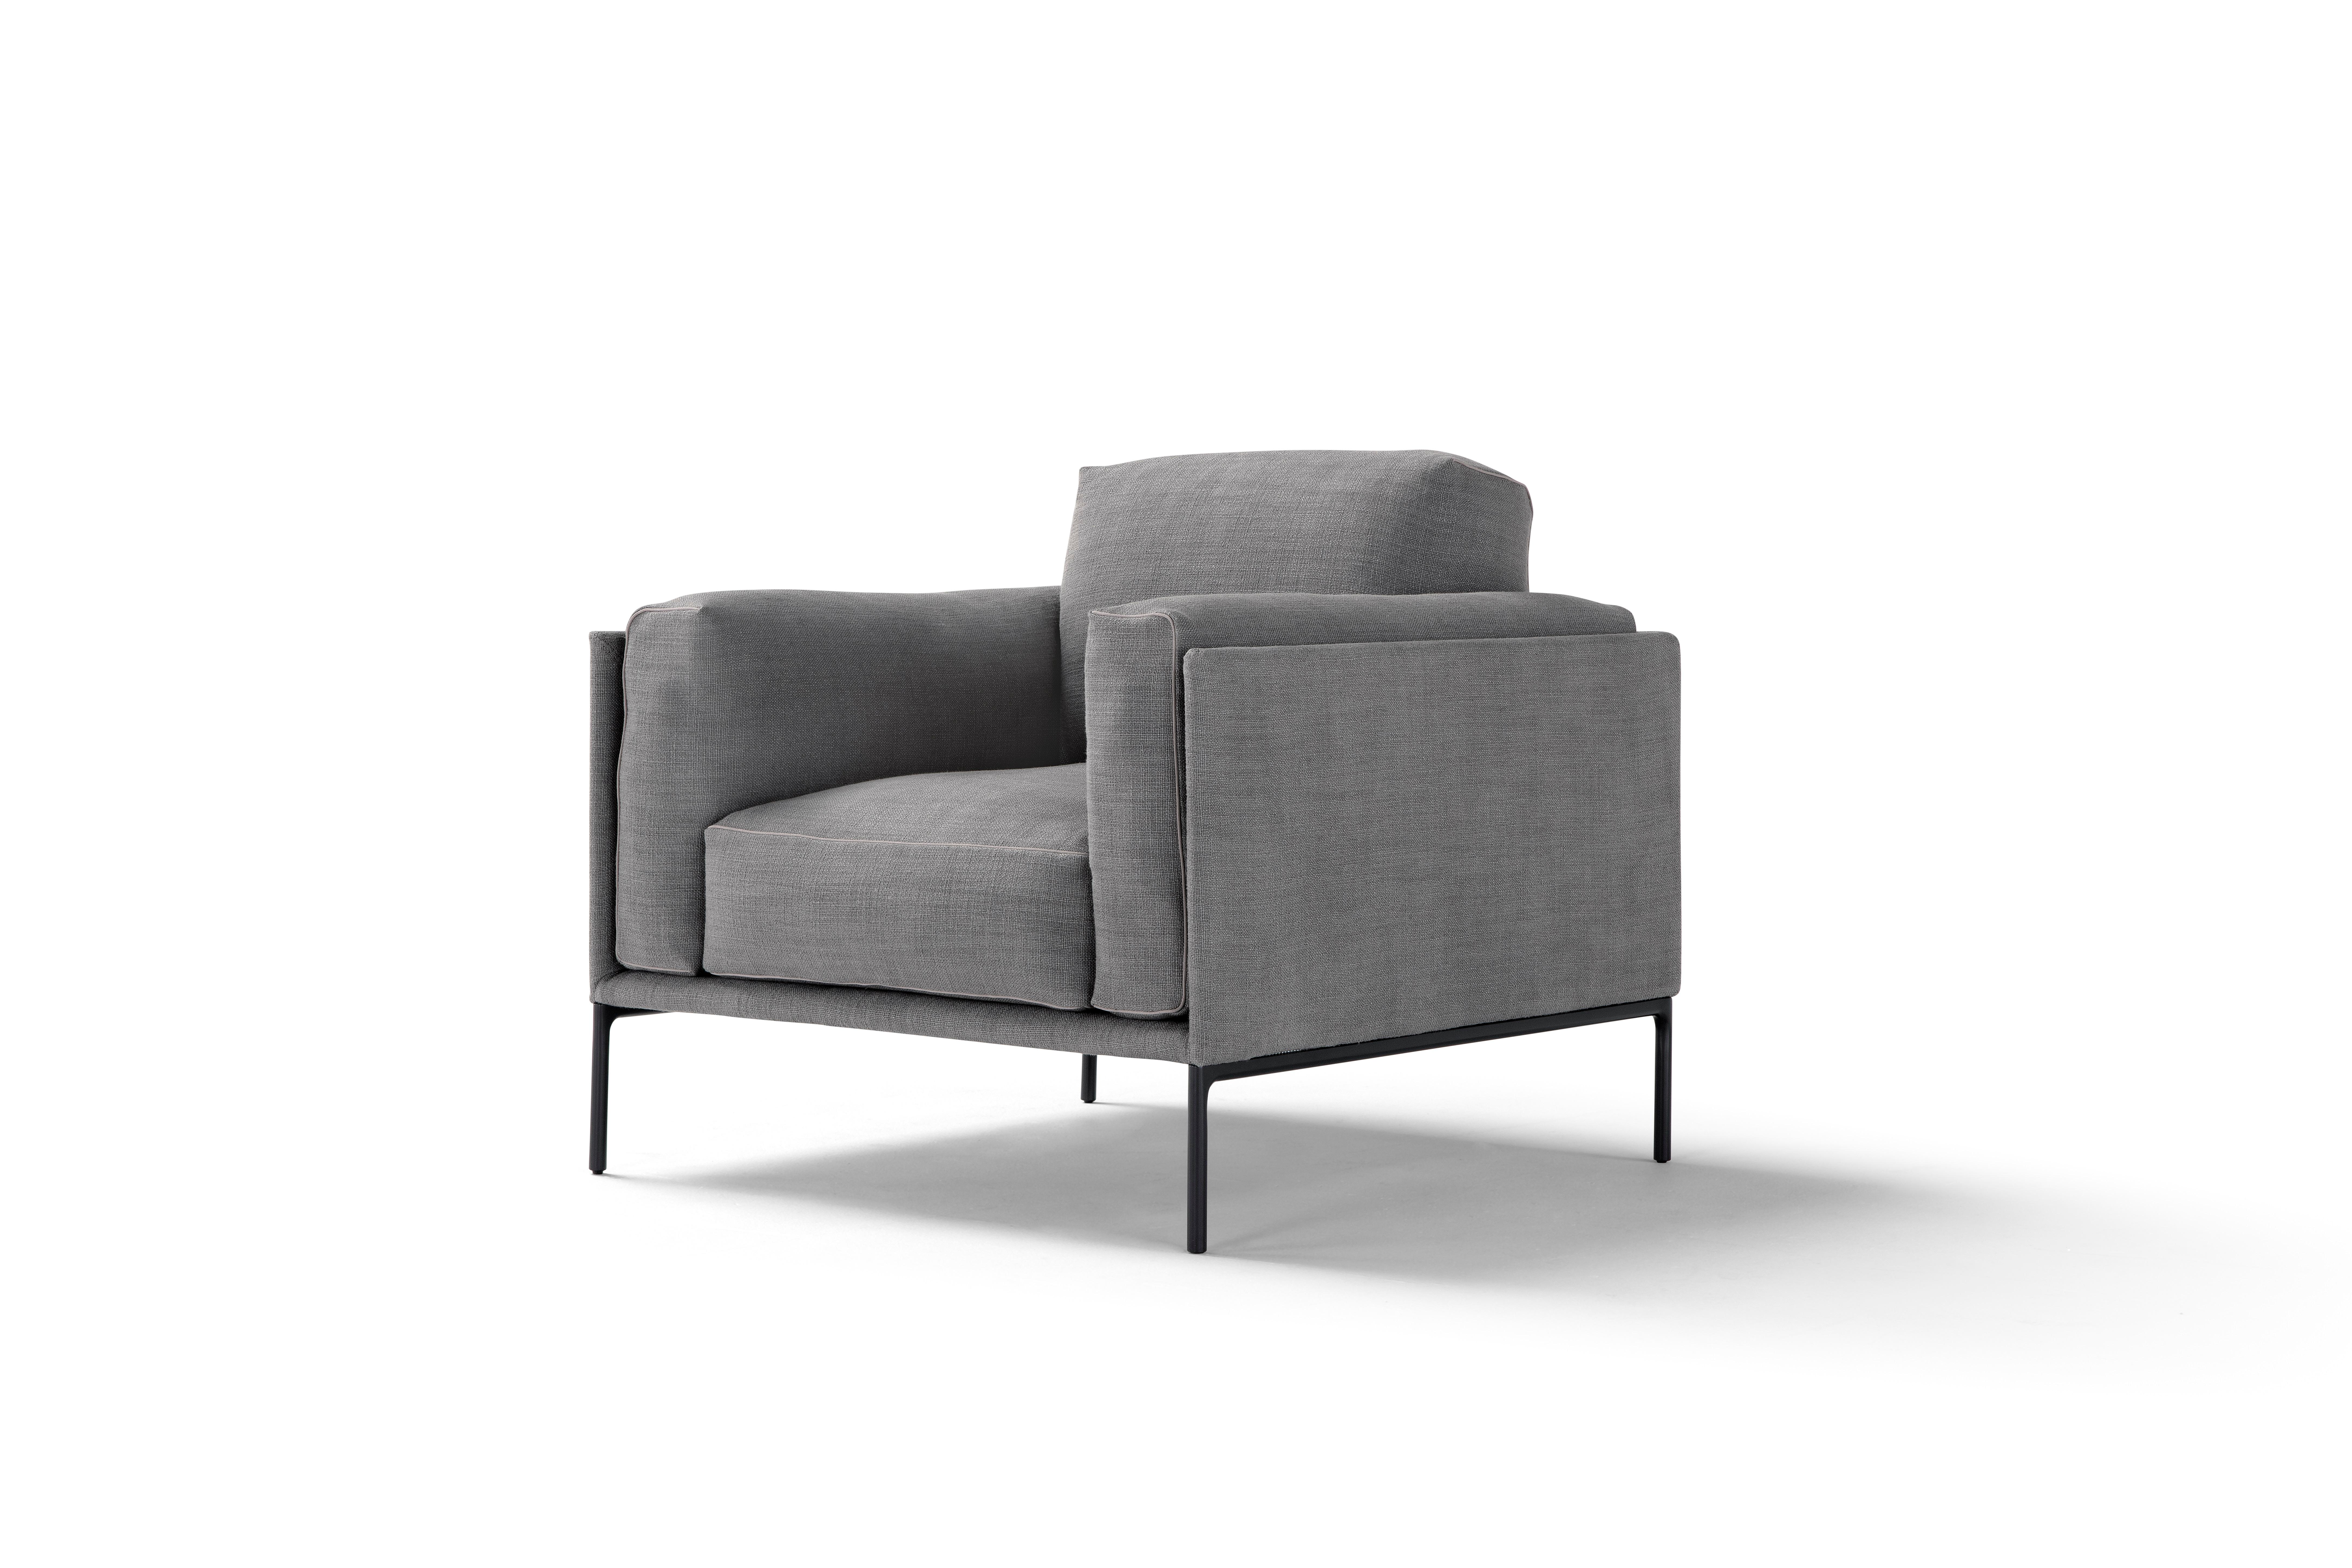 Armchair Giorgio by Amura Lab 

Configuration: 10
Model shown: Fabric - Decio 04

“Perfect synthesis of form and function, comfort” A rigid and regular shell, welcomes soft and enveloping seats and backs. Giorgio has the formal characteristics of a